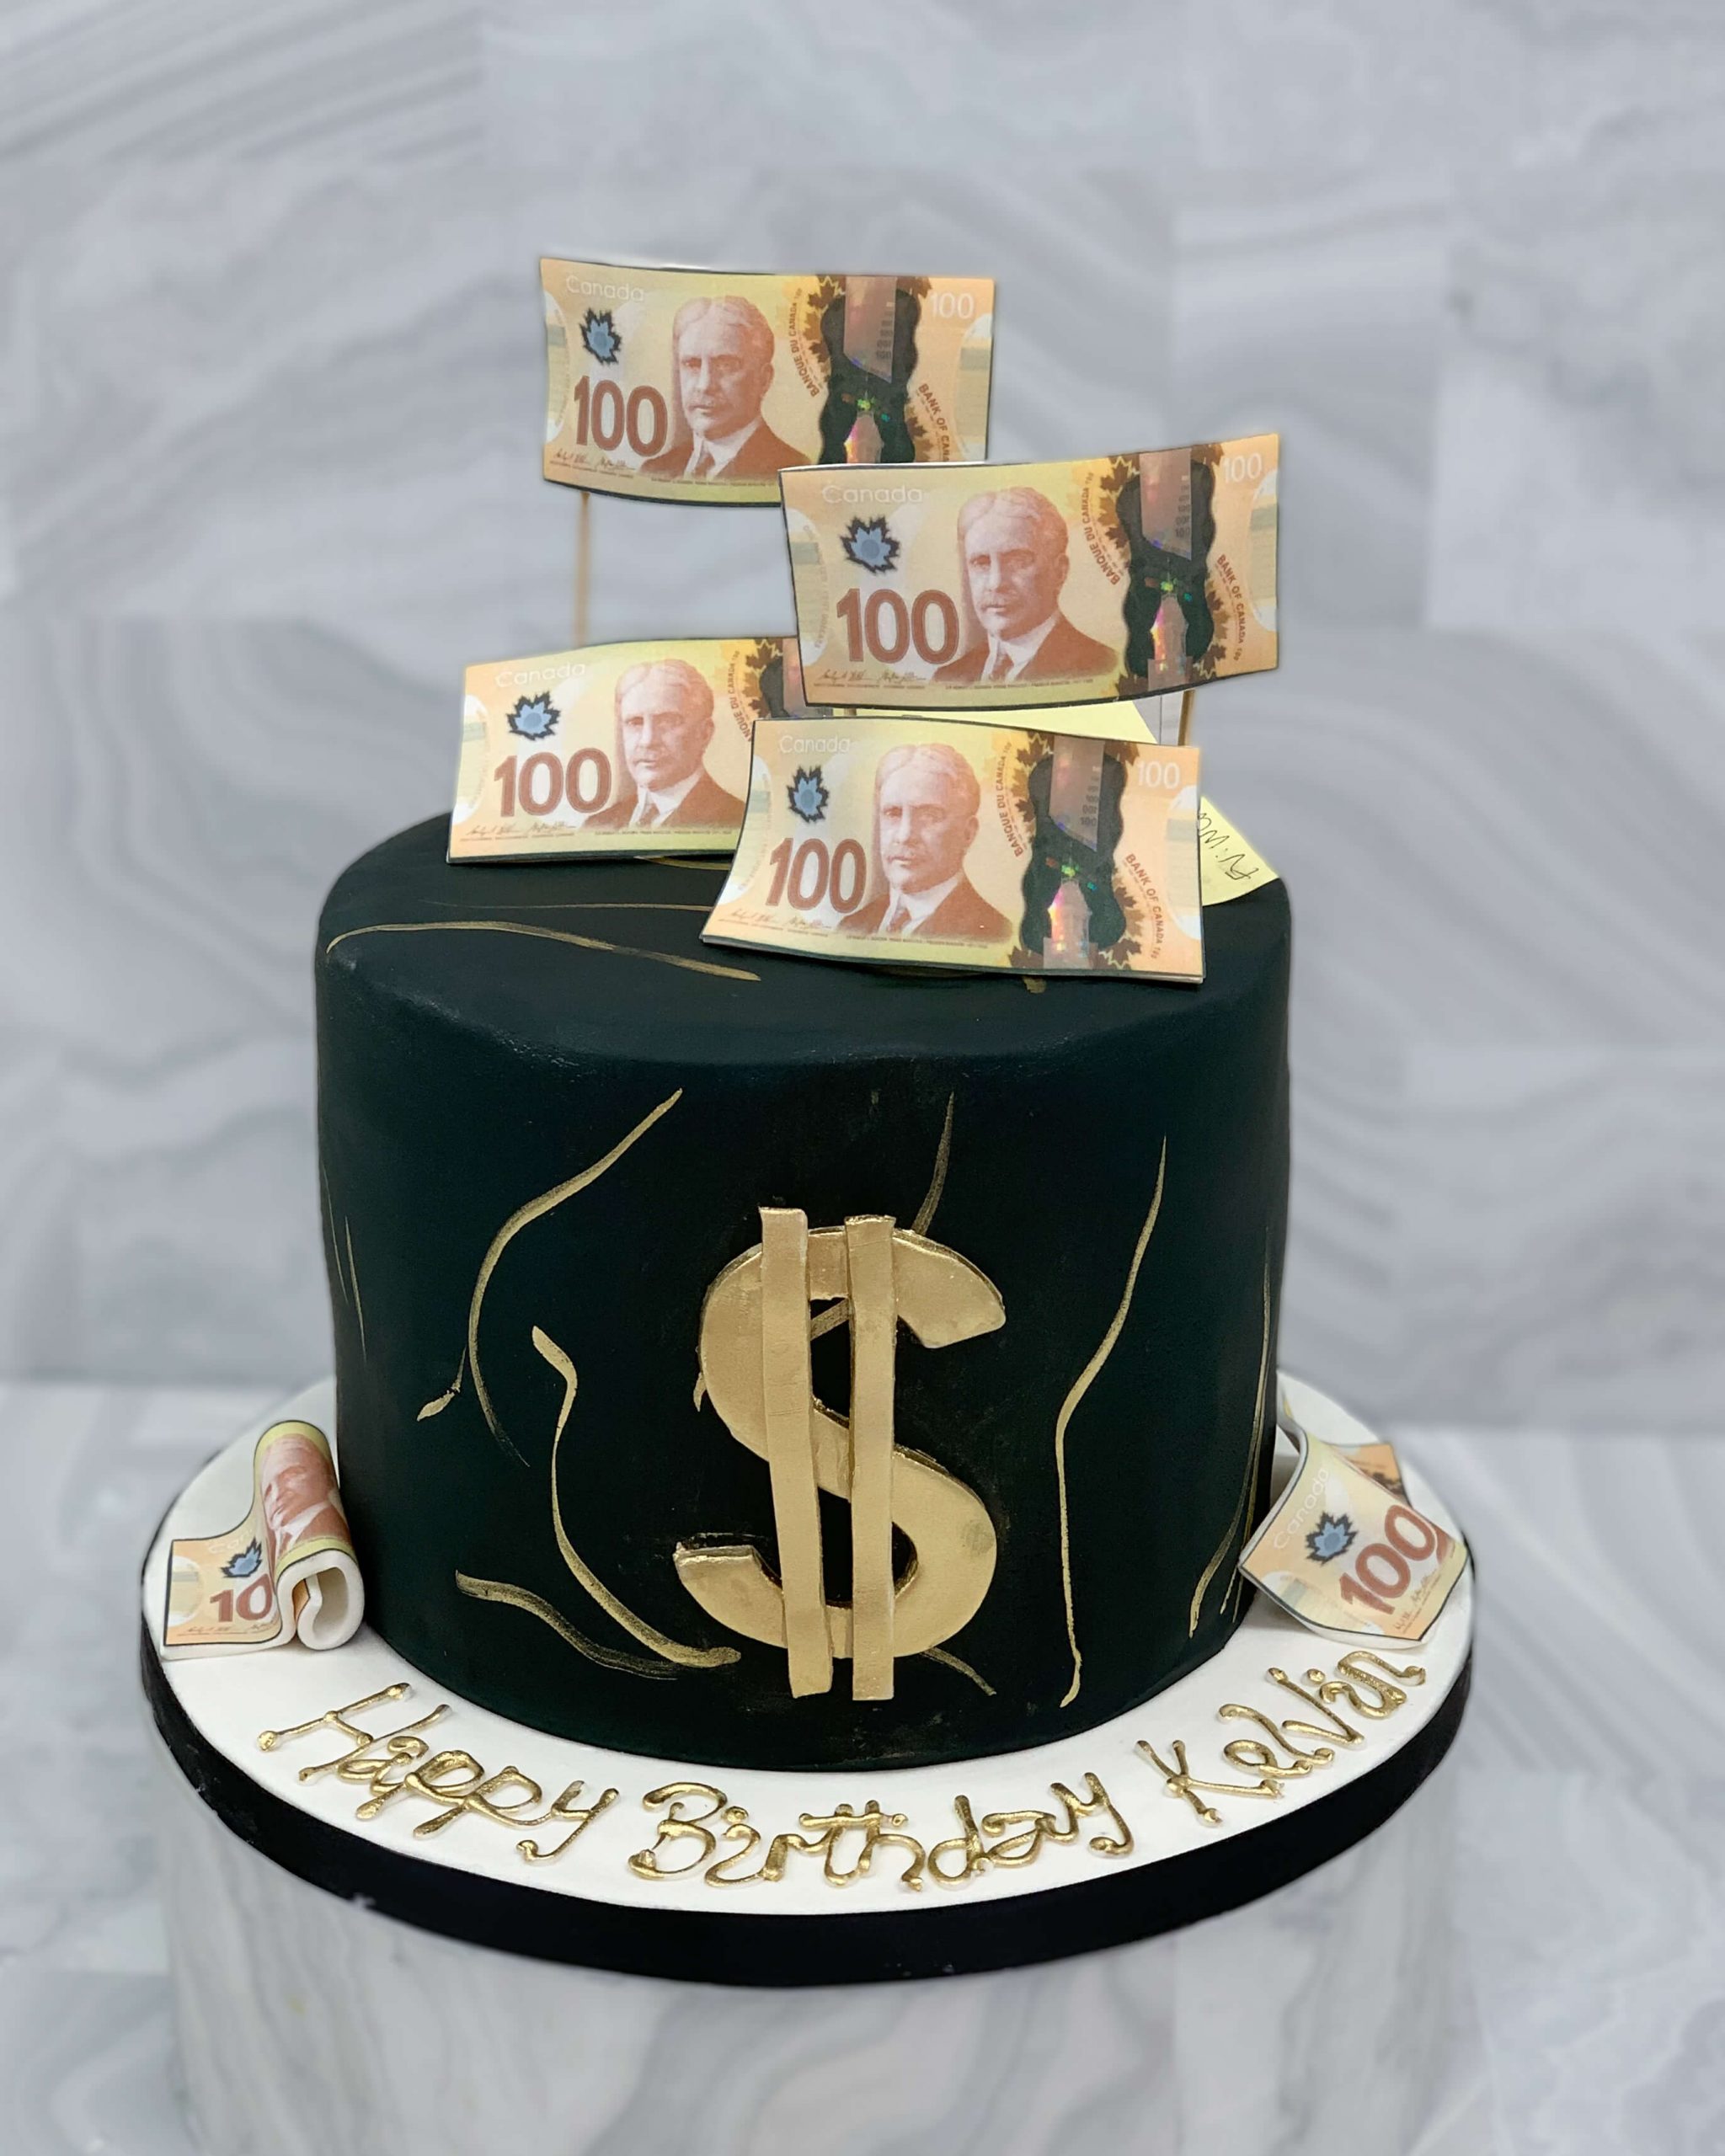 Celebrate Your Birthday in Style with a Delicious Cake from Toronto's Just Temptations 